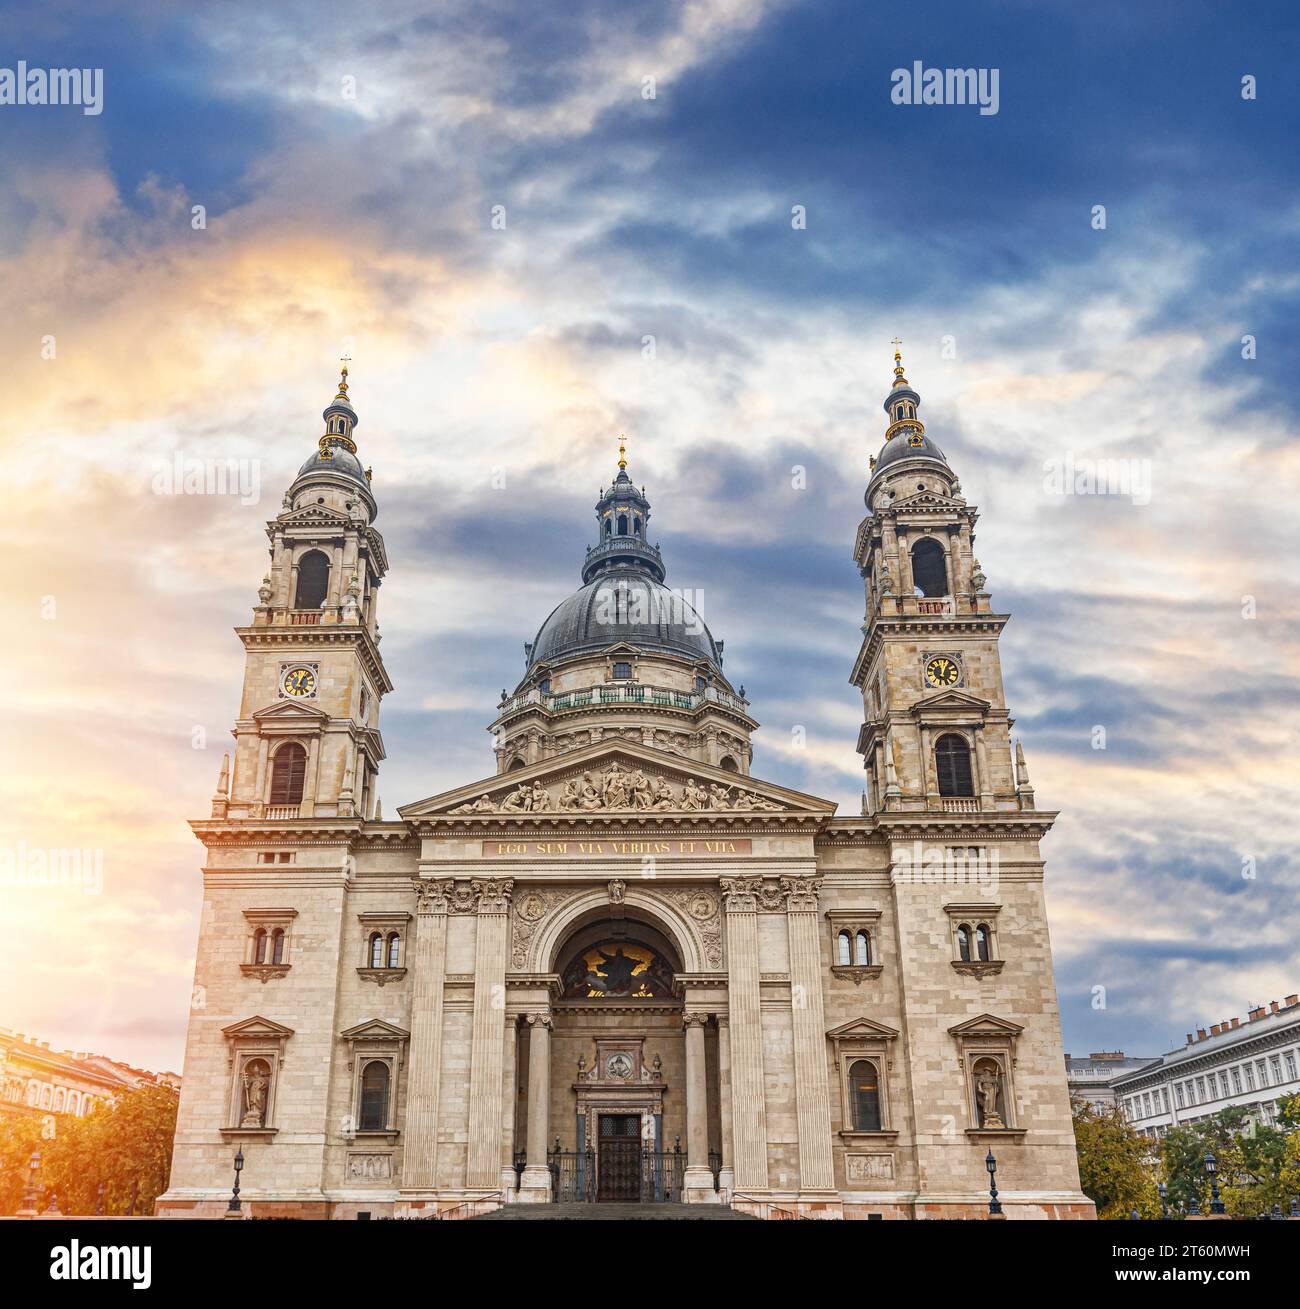 St. Stephen's Basilica in Budapest, Hungary at night. Roman catholic cathedral. Stock Photo